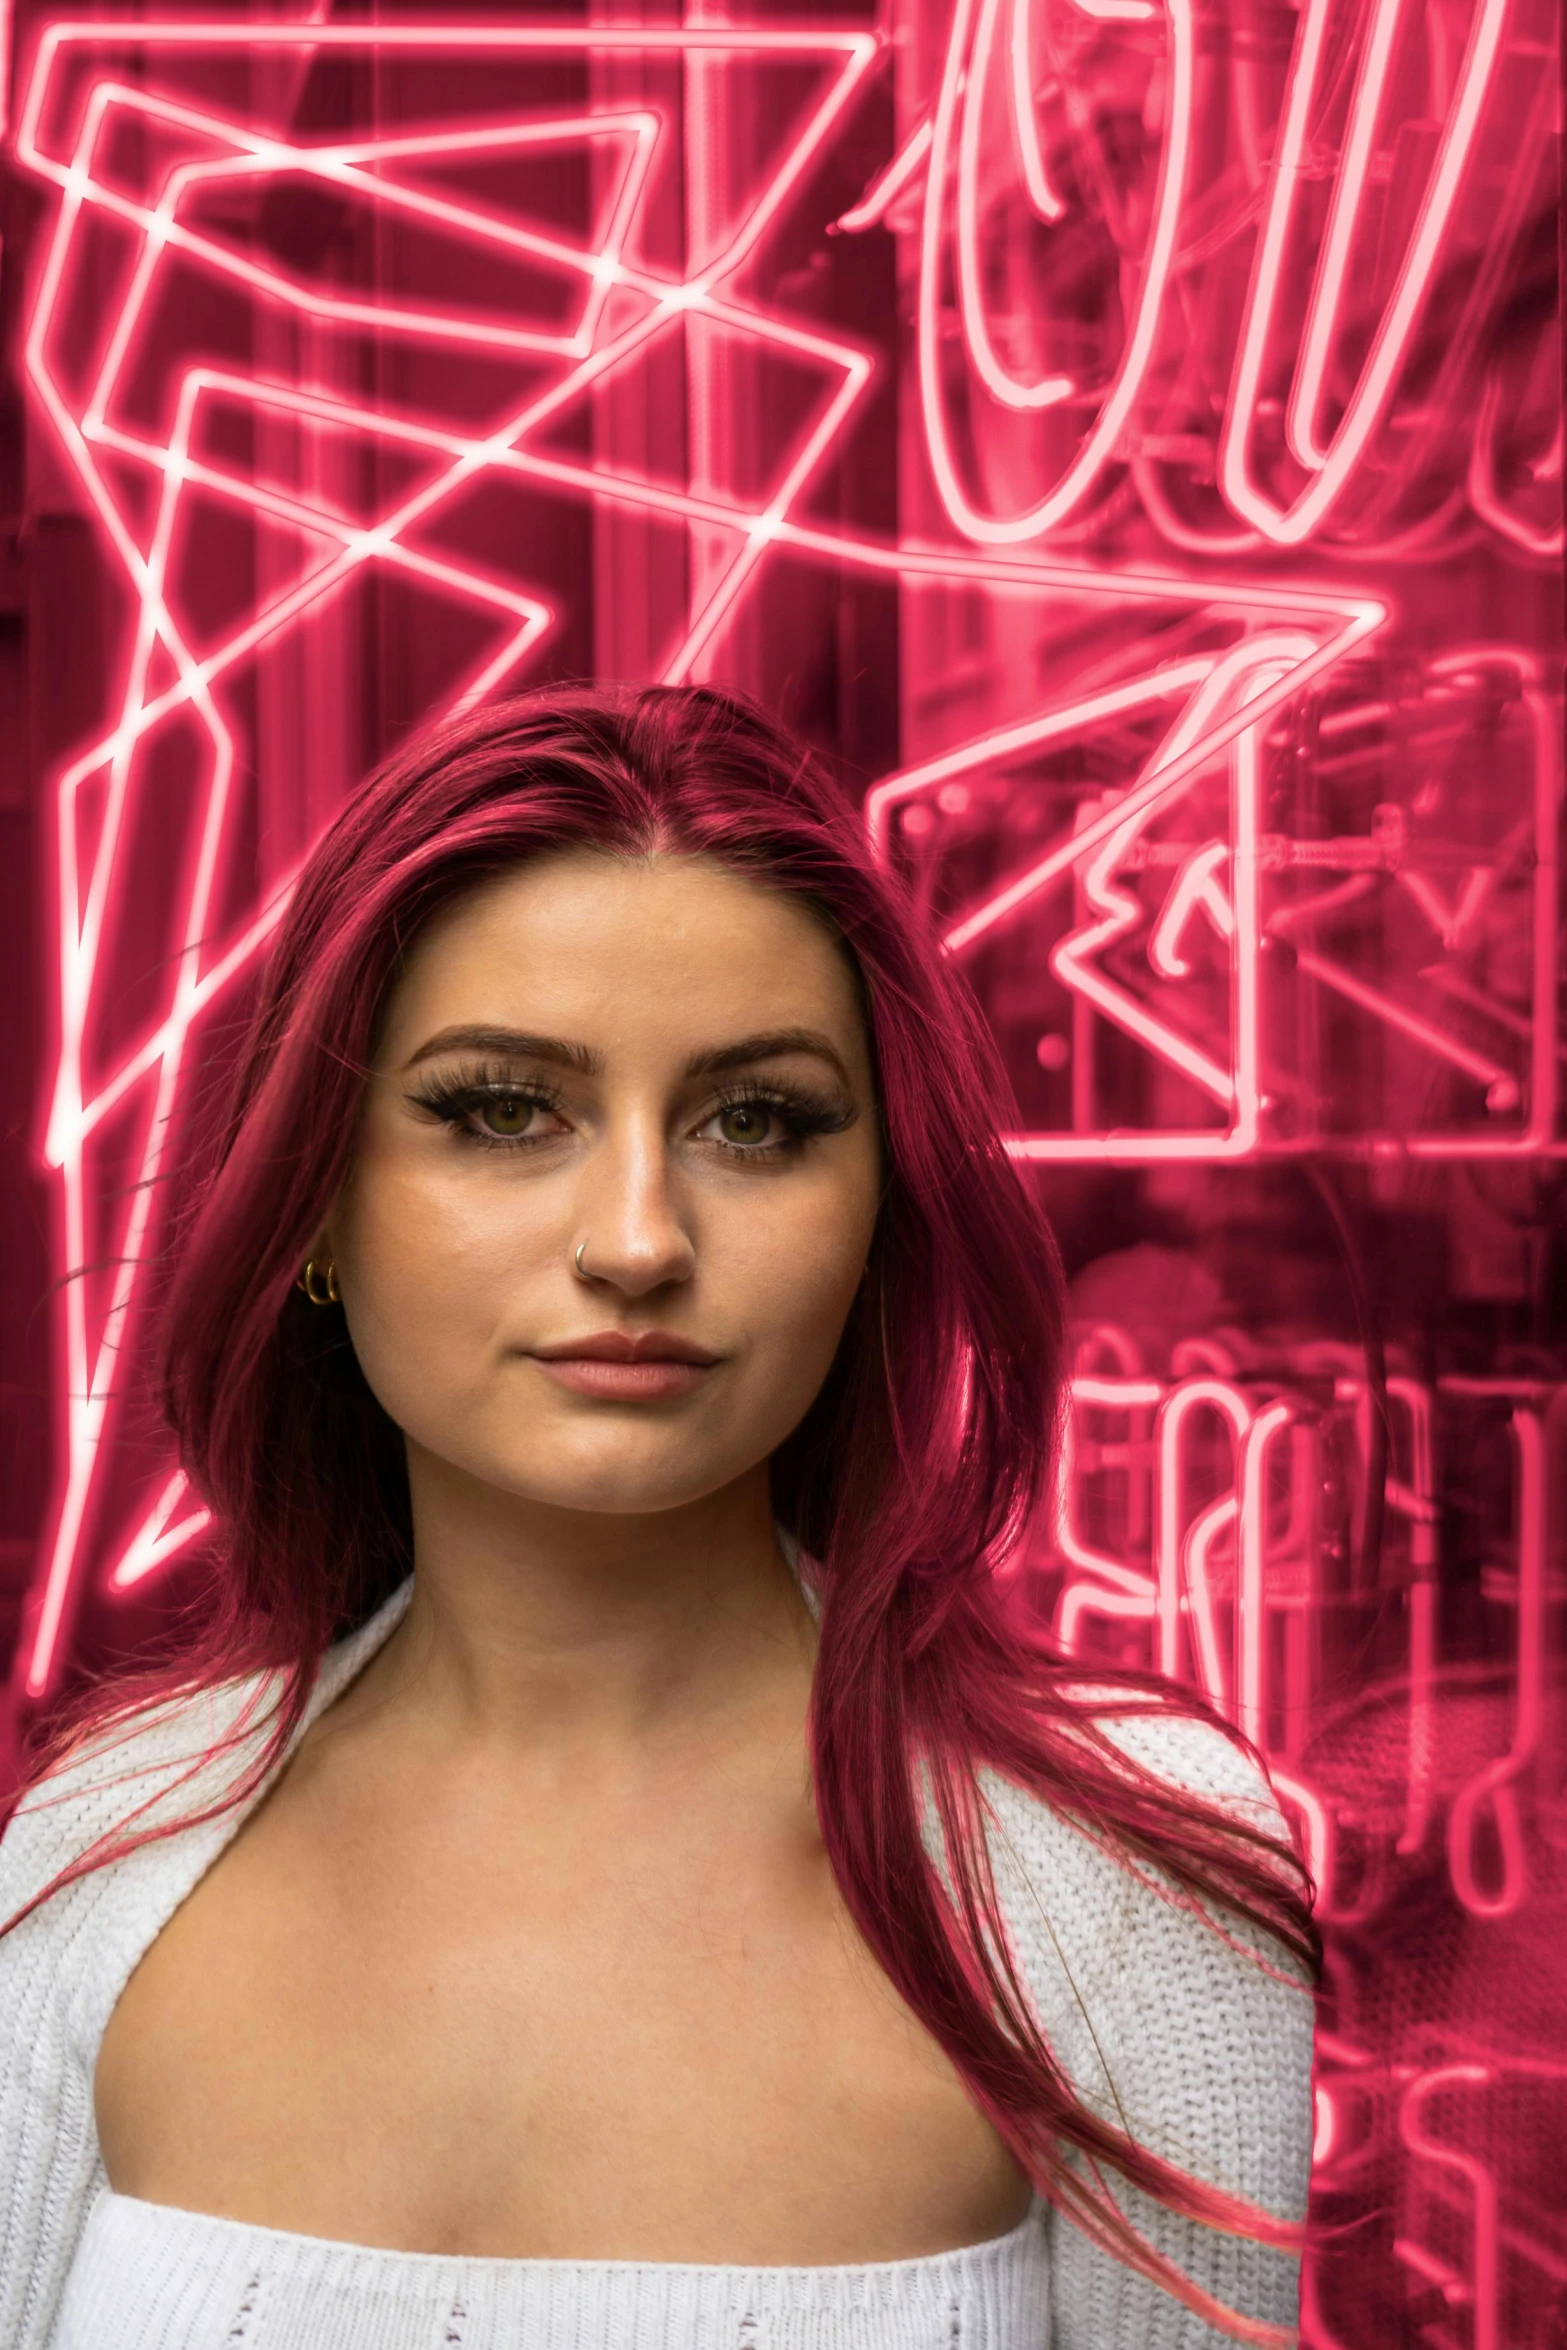 the girl is posing for a po in front of neon signs